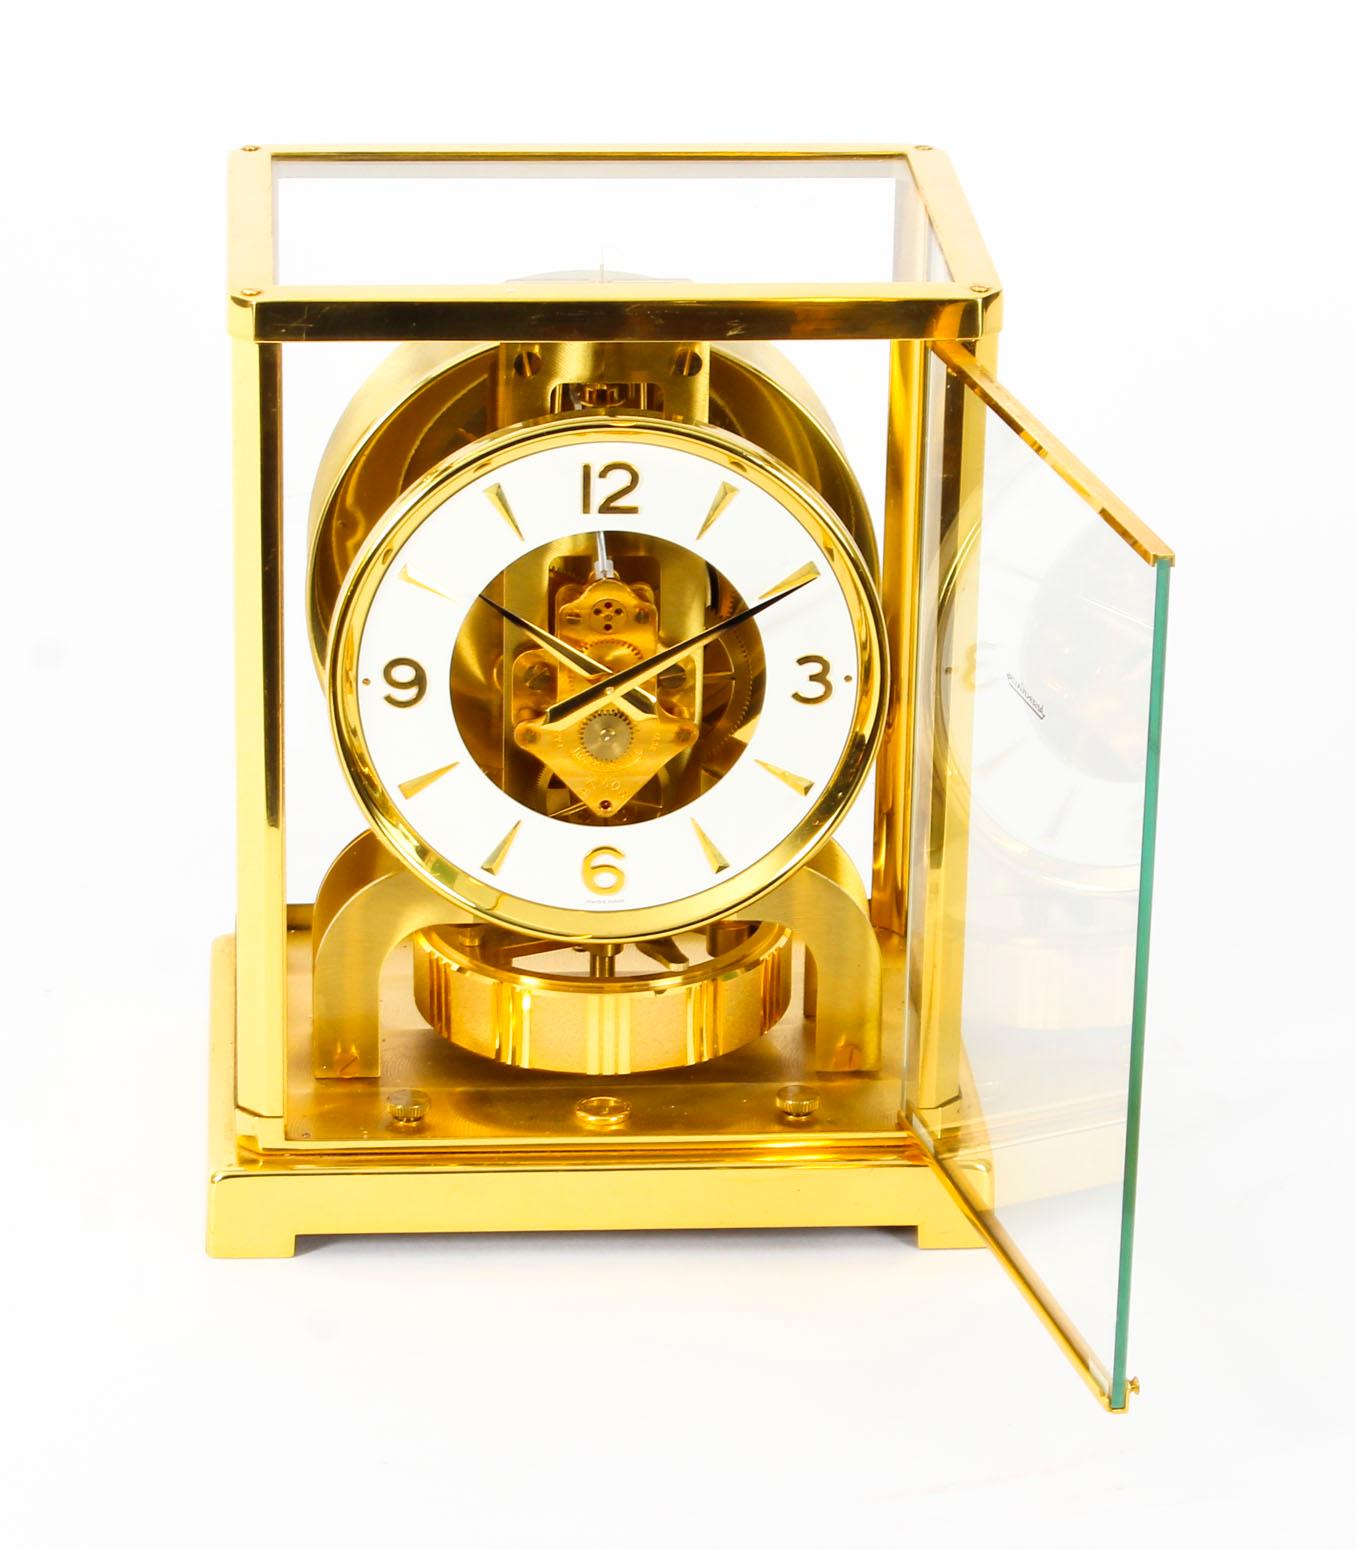 This is beautiful and very decorative vintage Atmos mantle clock by Jaeger-LeCoultre, bearing their ref No. 345158.

The clock is displayed in a polished gilt rectangular brass case with a glazed door, the case lifts off to allow access to the